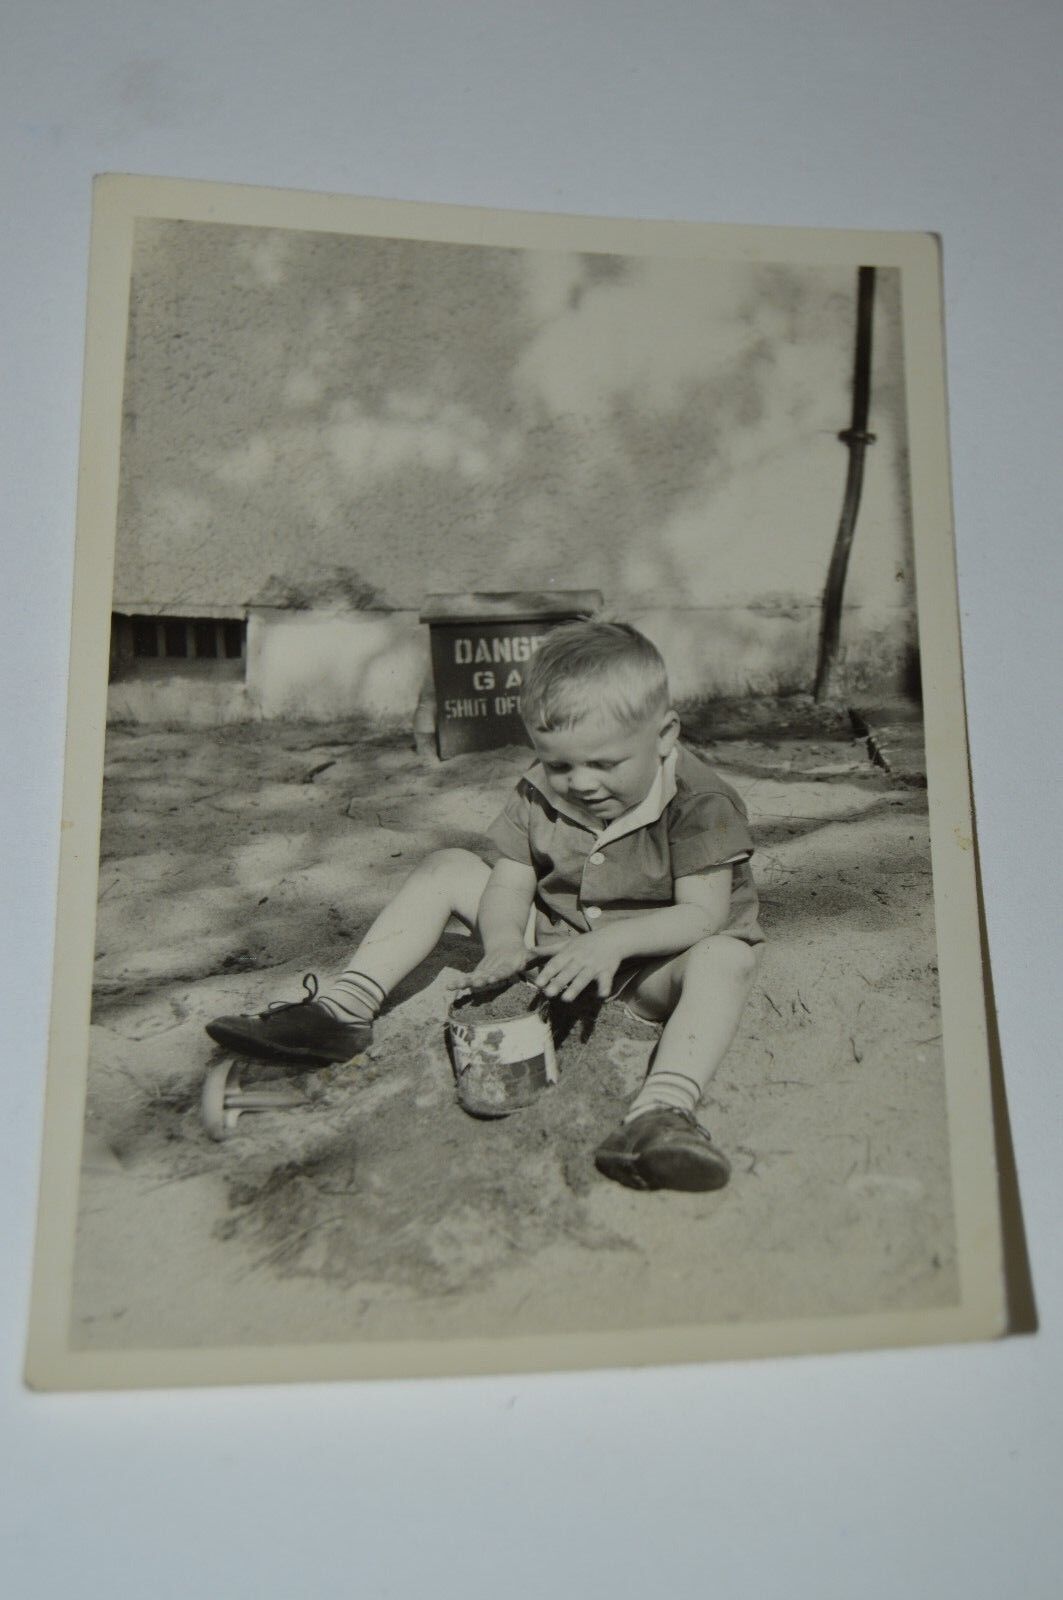 Vintage Child Playing In Sand Coffee Can Danger GAS Shut Off Valve Photo Rare